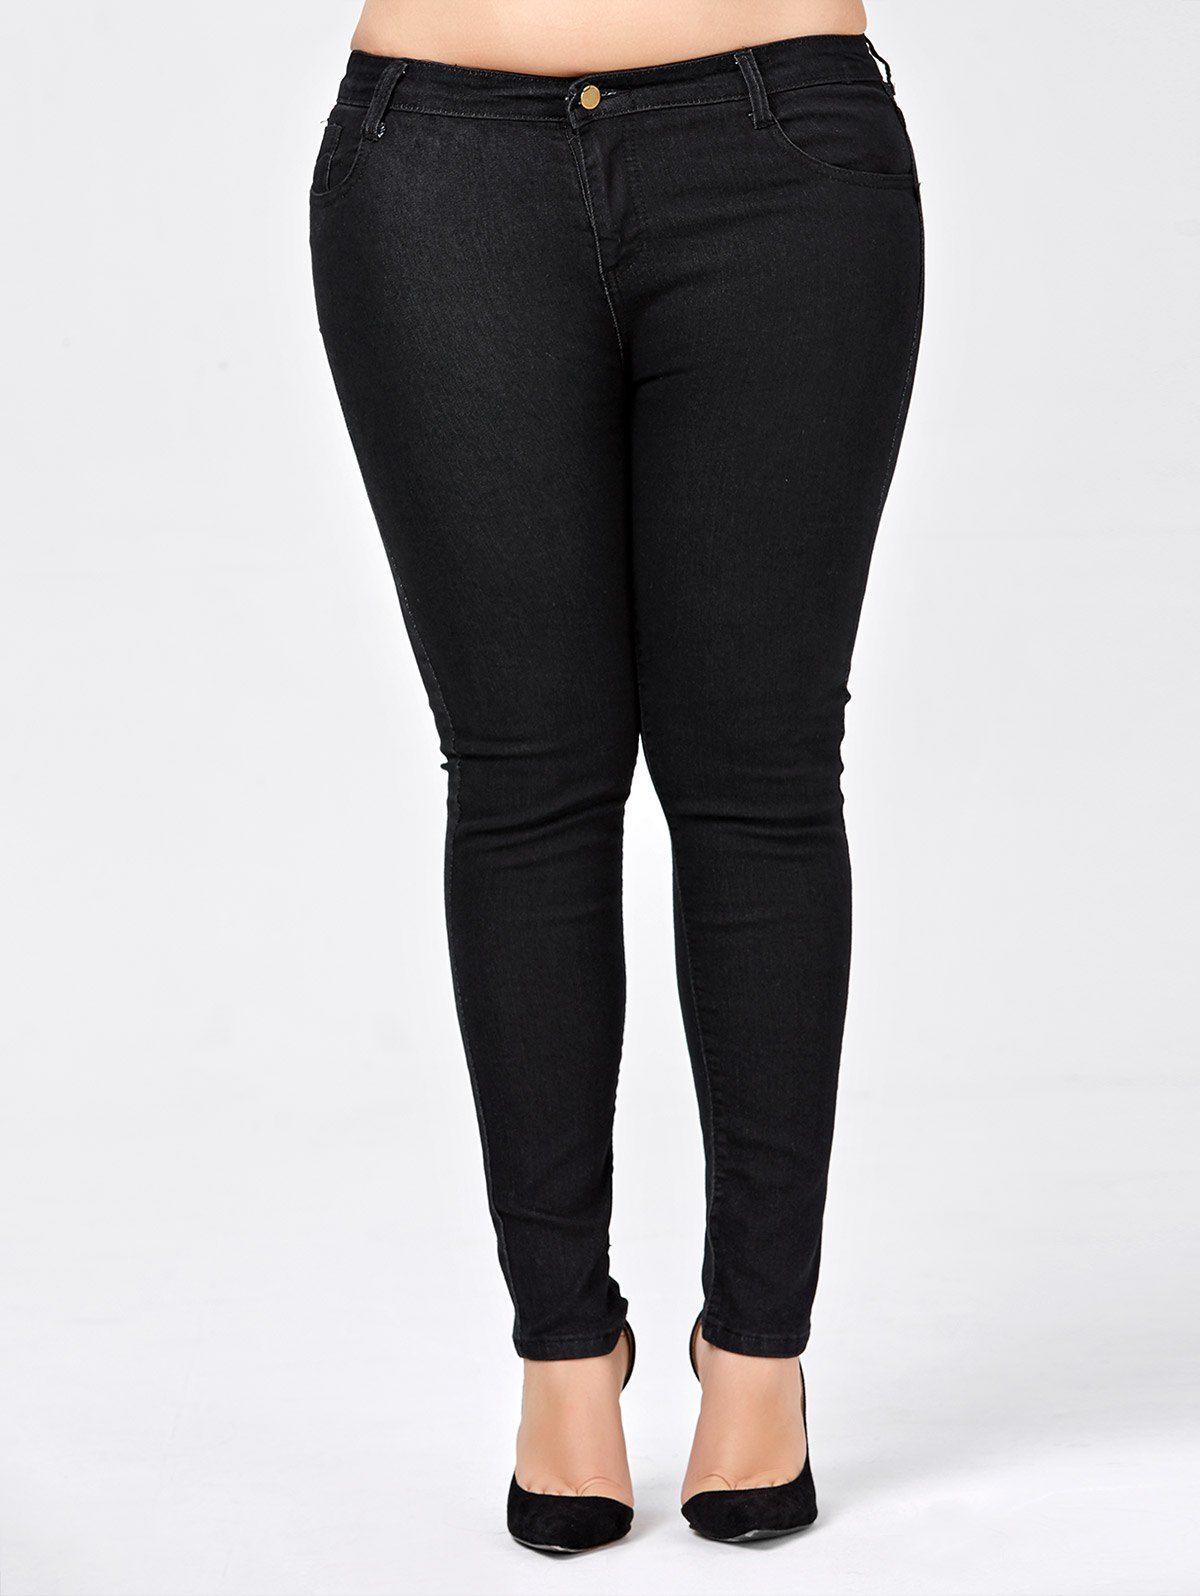 Shop Plus Size Skinny Jeans with Pocket  